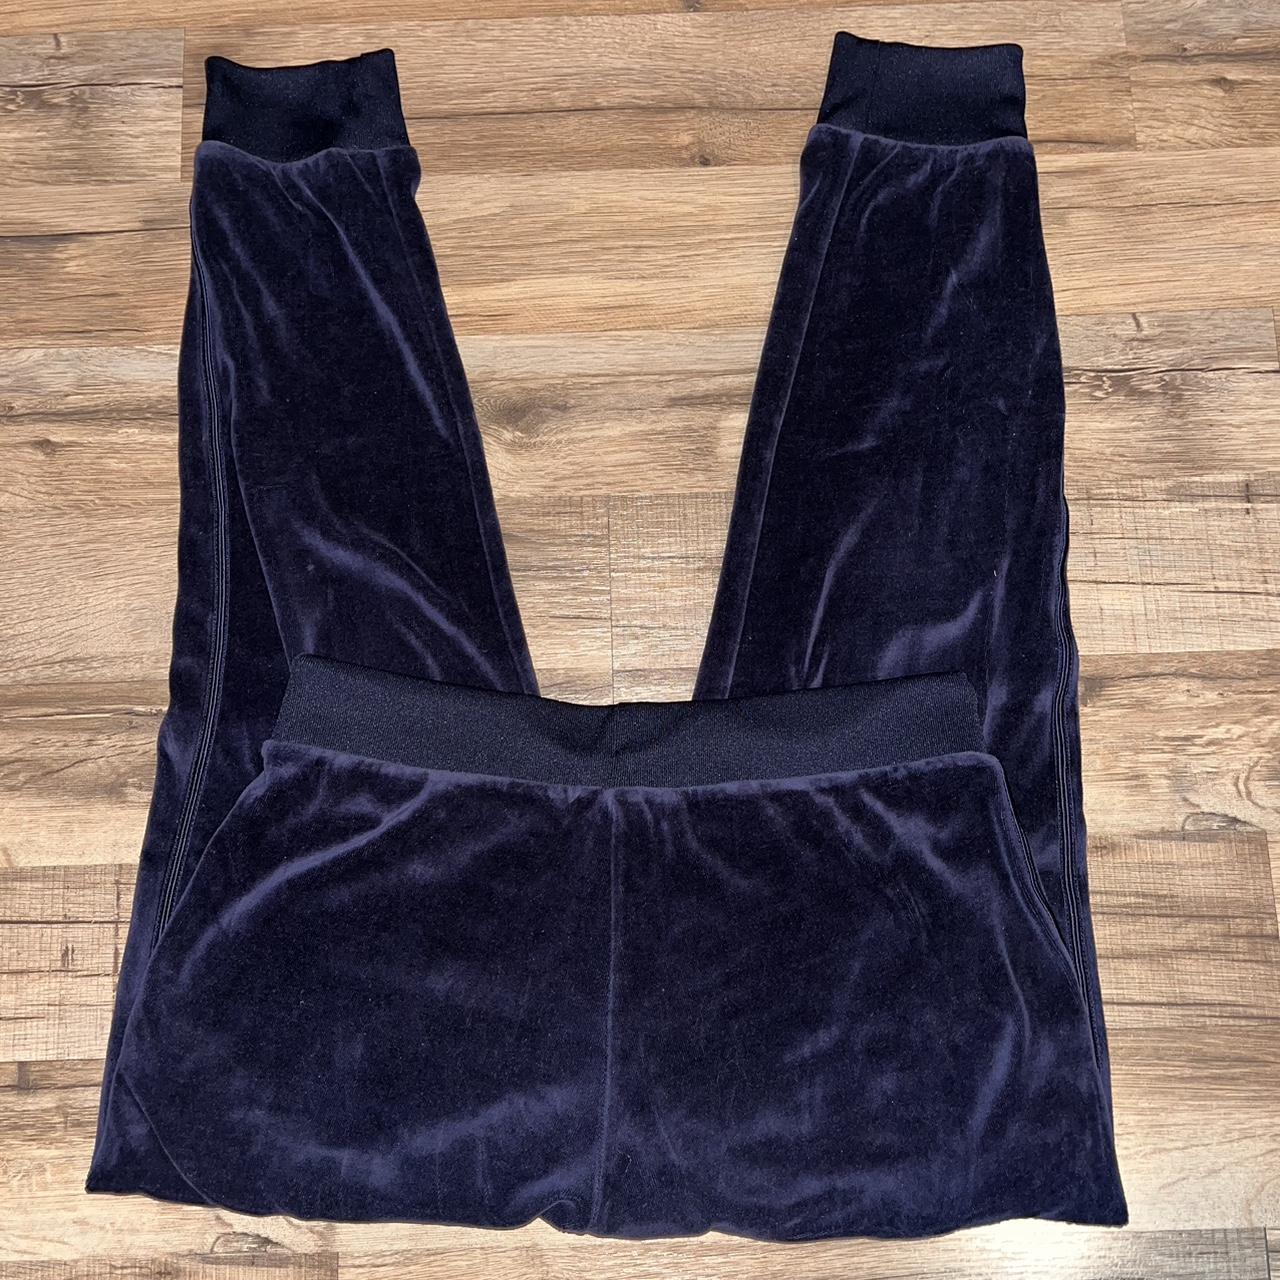 Juicy Couture Women's Navy Joggers-tracksuits | Depop